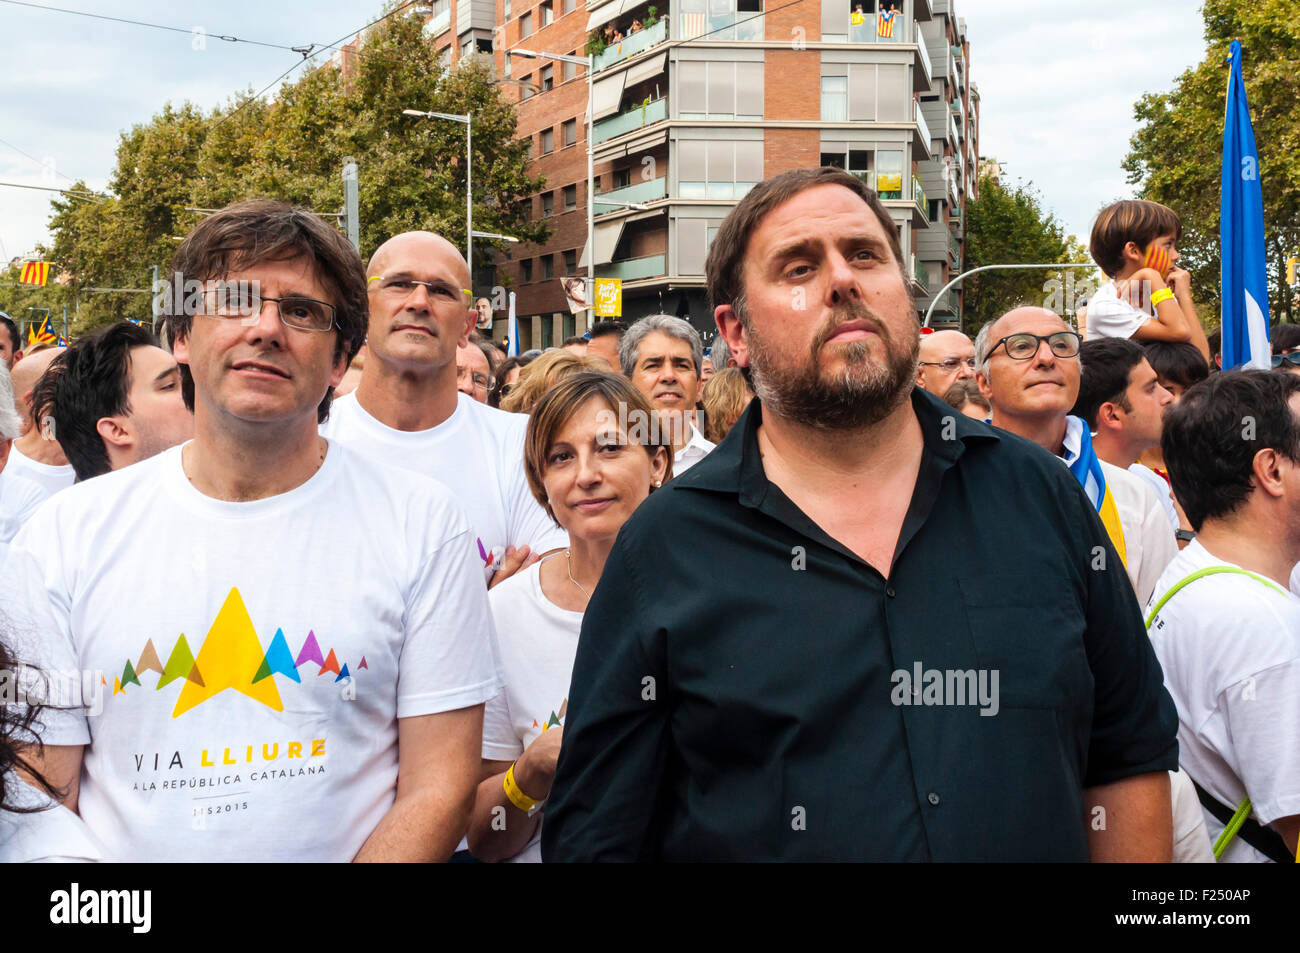 Barcelona , Catalonia, Spain . 11th Sep, 2015. The candidates Junts pel Yes , Oriol Junqueras , Raul Romeva and Carme Forcadell, during the Via Lliure to the Catalan Republic , independence mobilization organized by the Catalan National Assemblea and Omnium Cultural in the national day catalonia. The independence demonstration convened hundreds of thousands of people in Barcelona Avenida Meridiana Credit:  Cisco Pelay / Alamy Live News Stock Photo